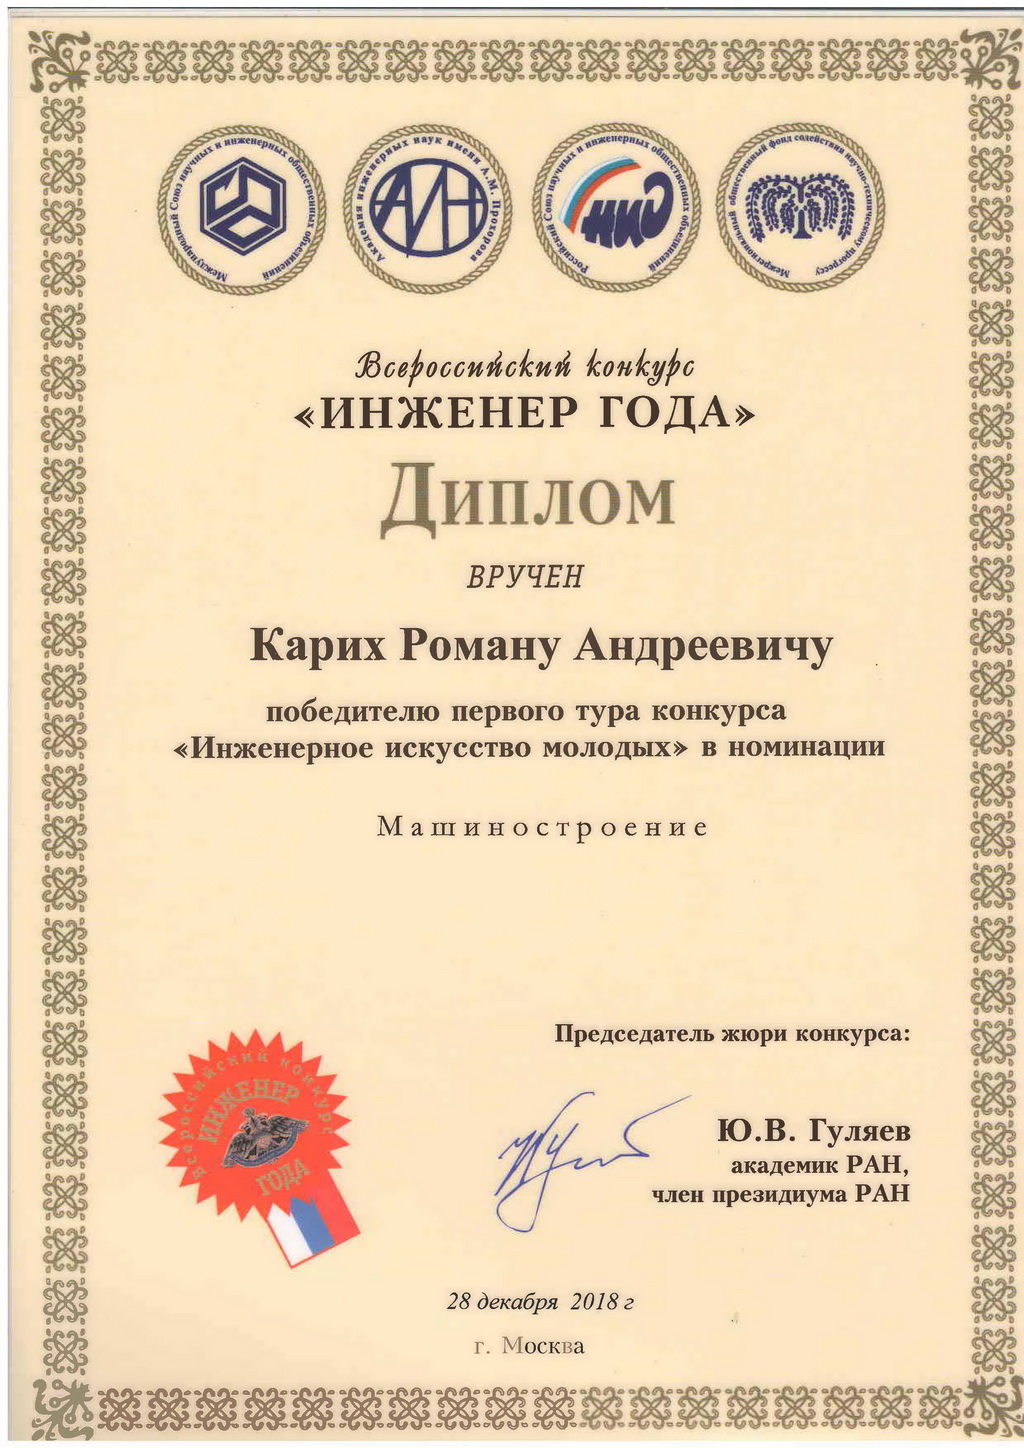 RTMT professionals. Karikh R. A. received the Diploma of the winner Engineering art of the young